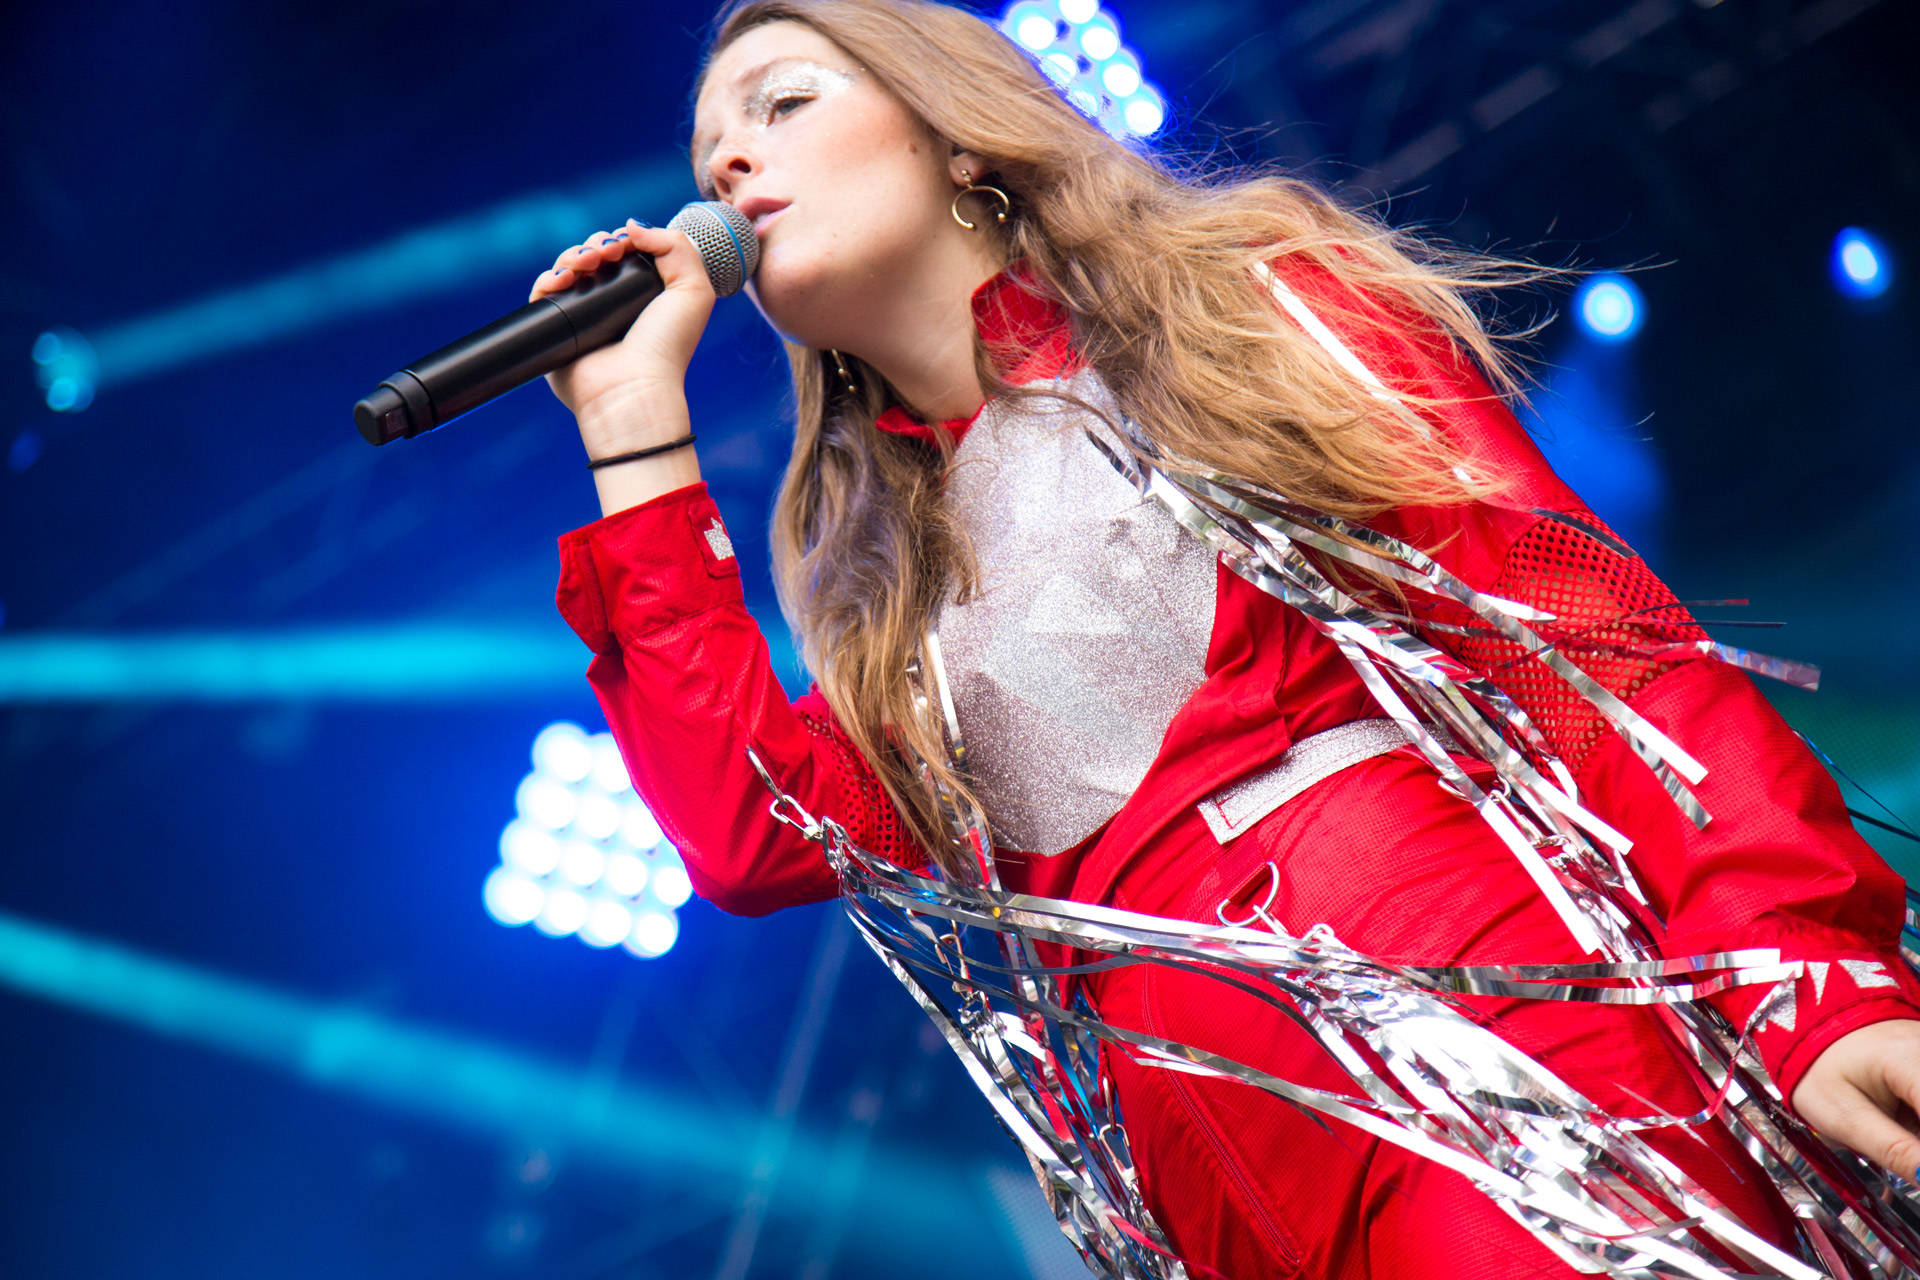 Maggie Rogers performs at the Outside Lands music festival in San Francisco, Aug. 13, 2017. Estefany Gonzalez